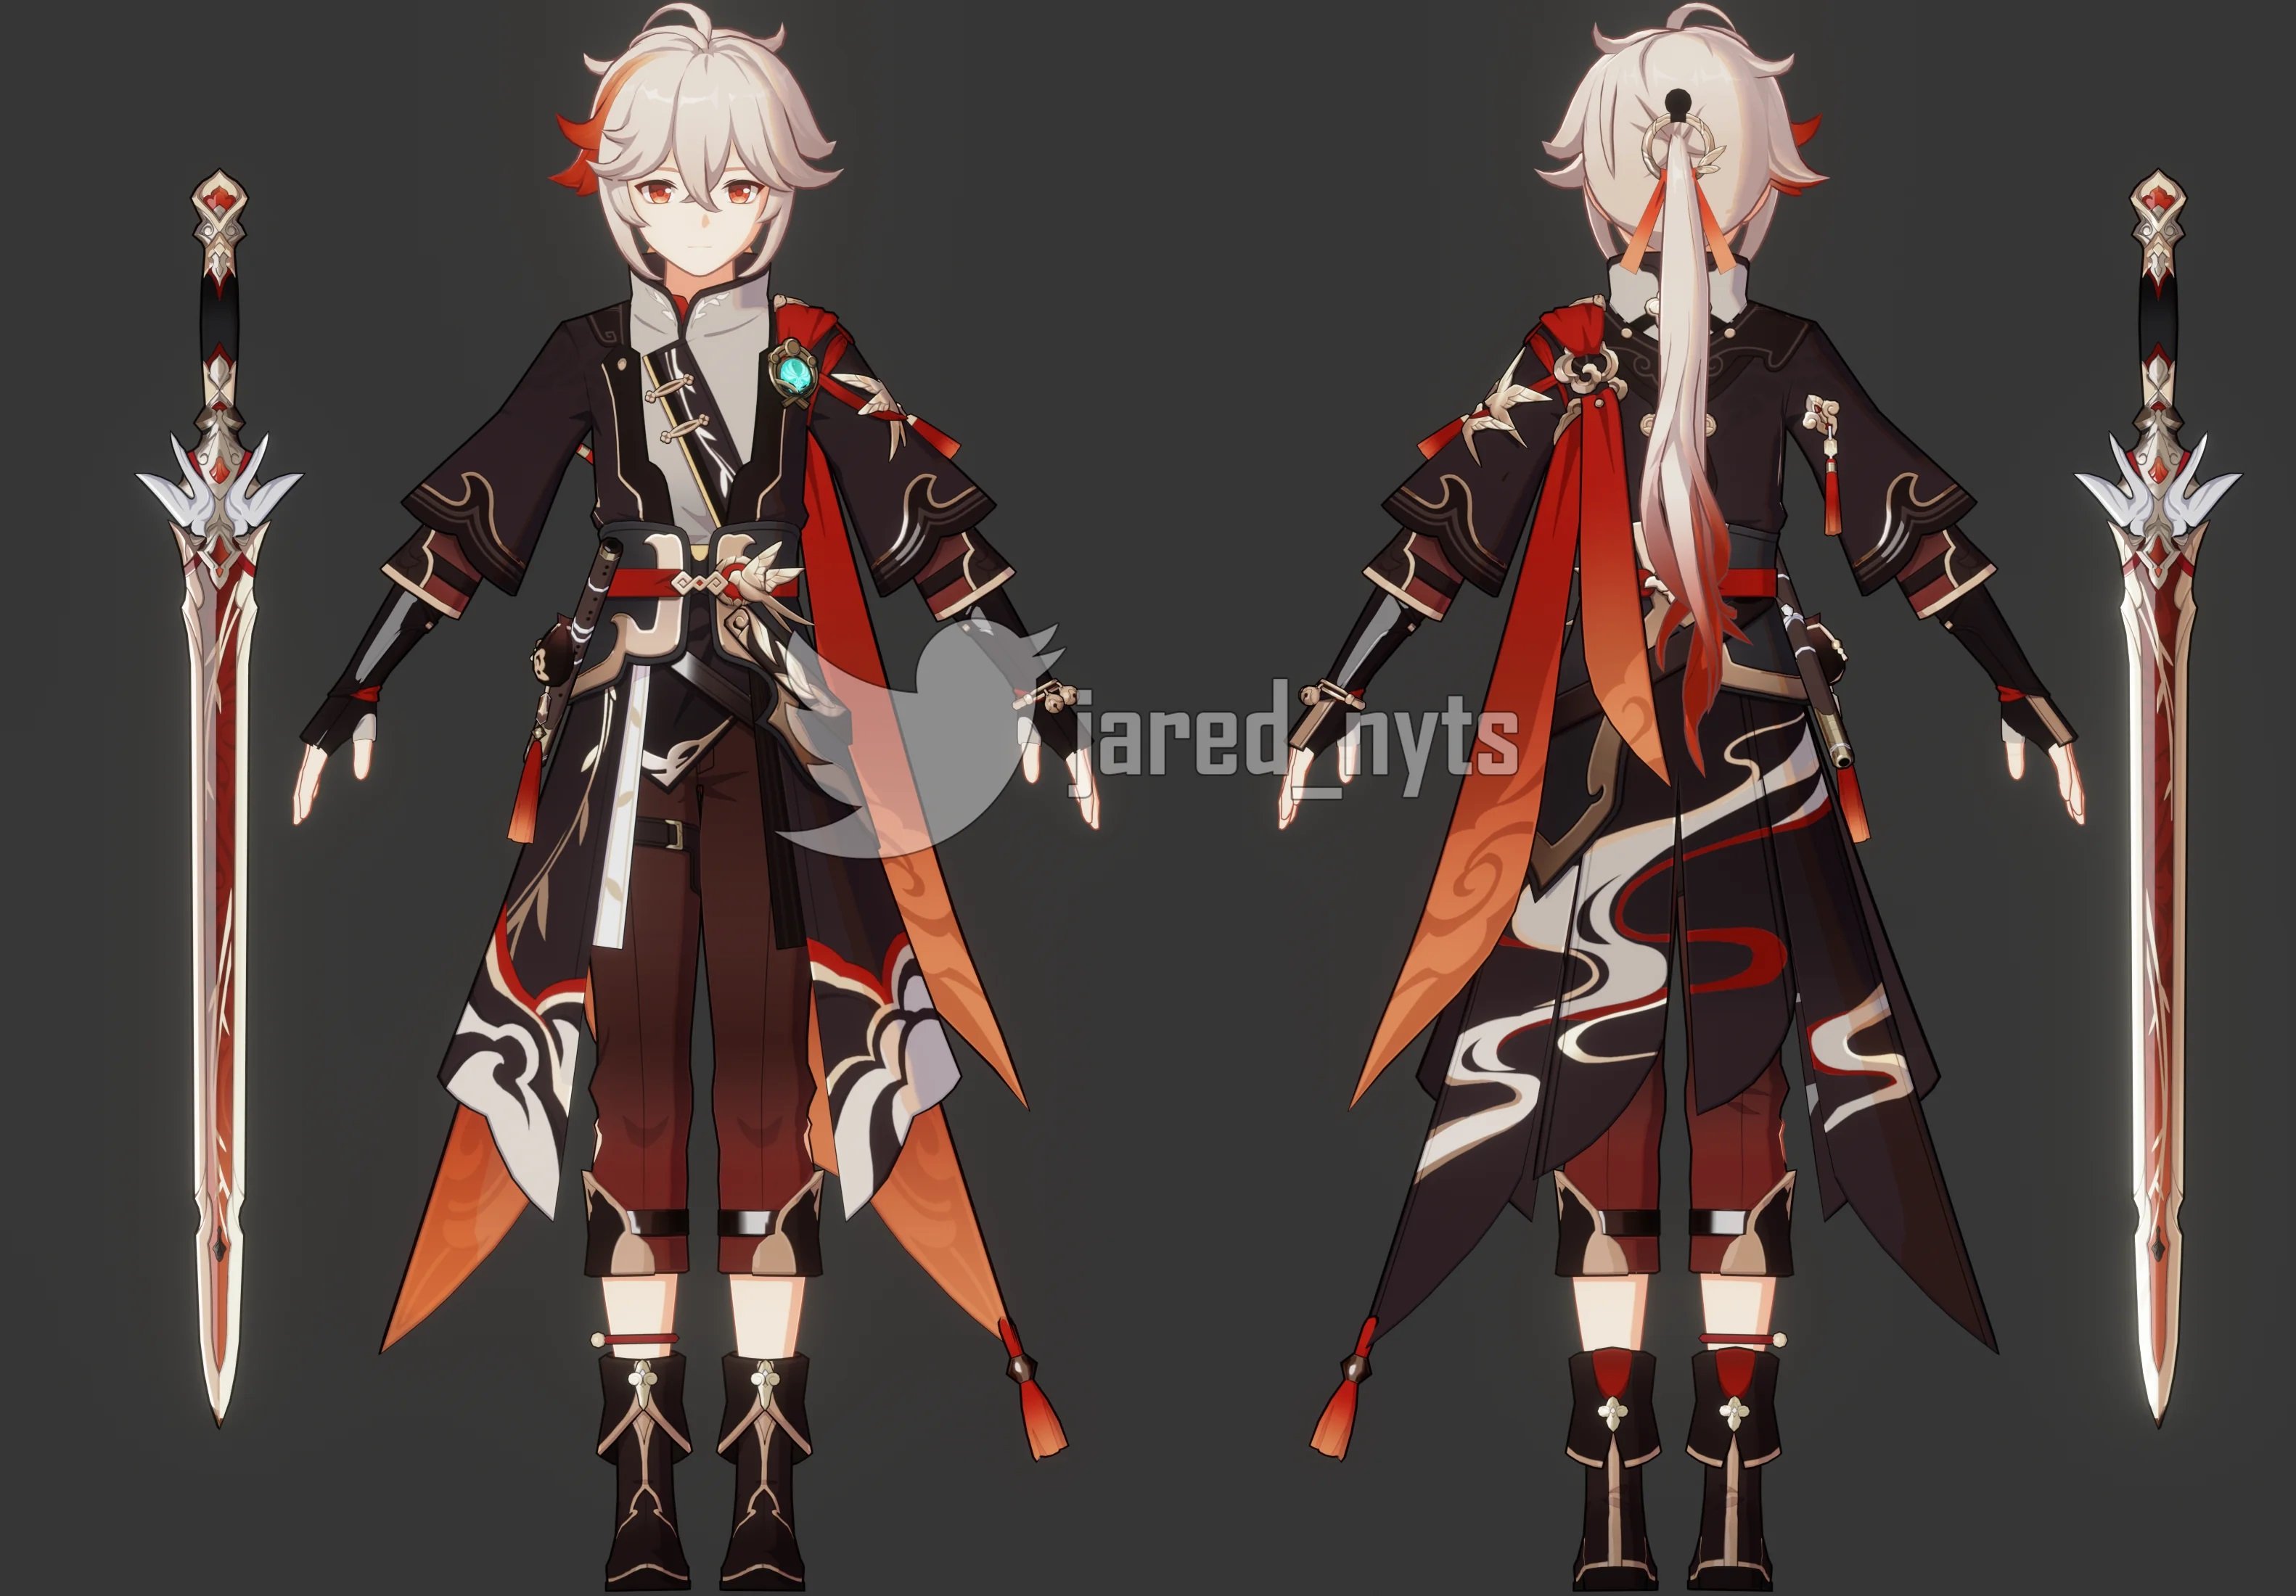 Kazuha's redesigned outfit combines with Yanqing's style